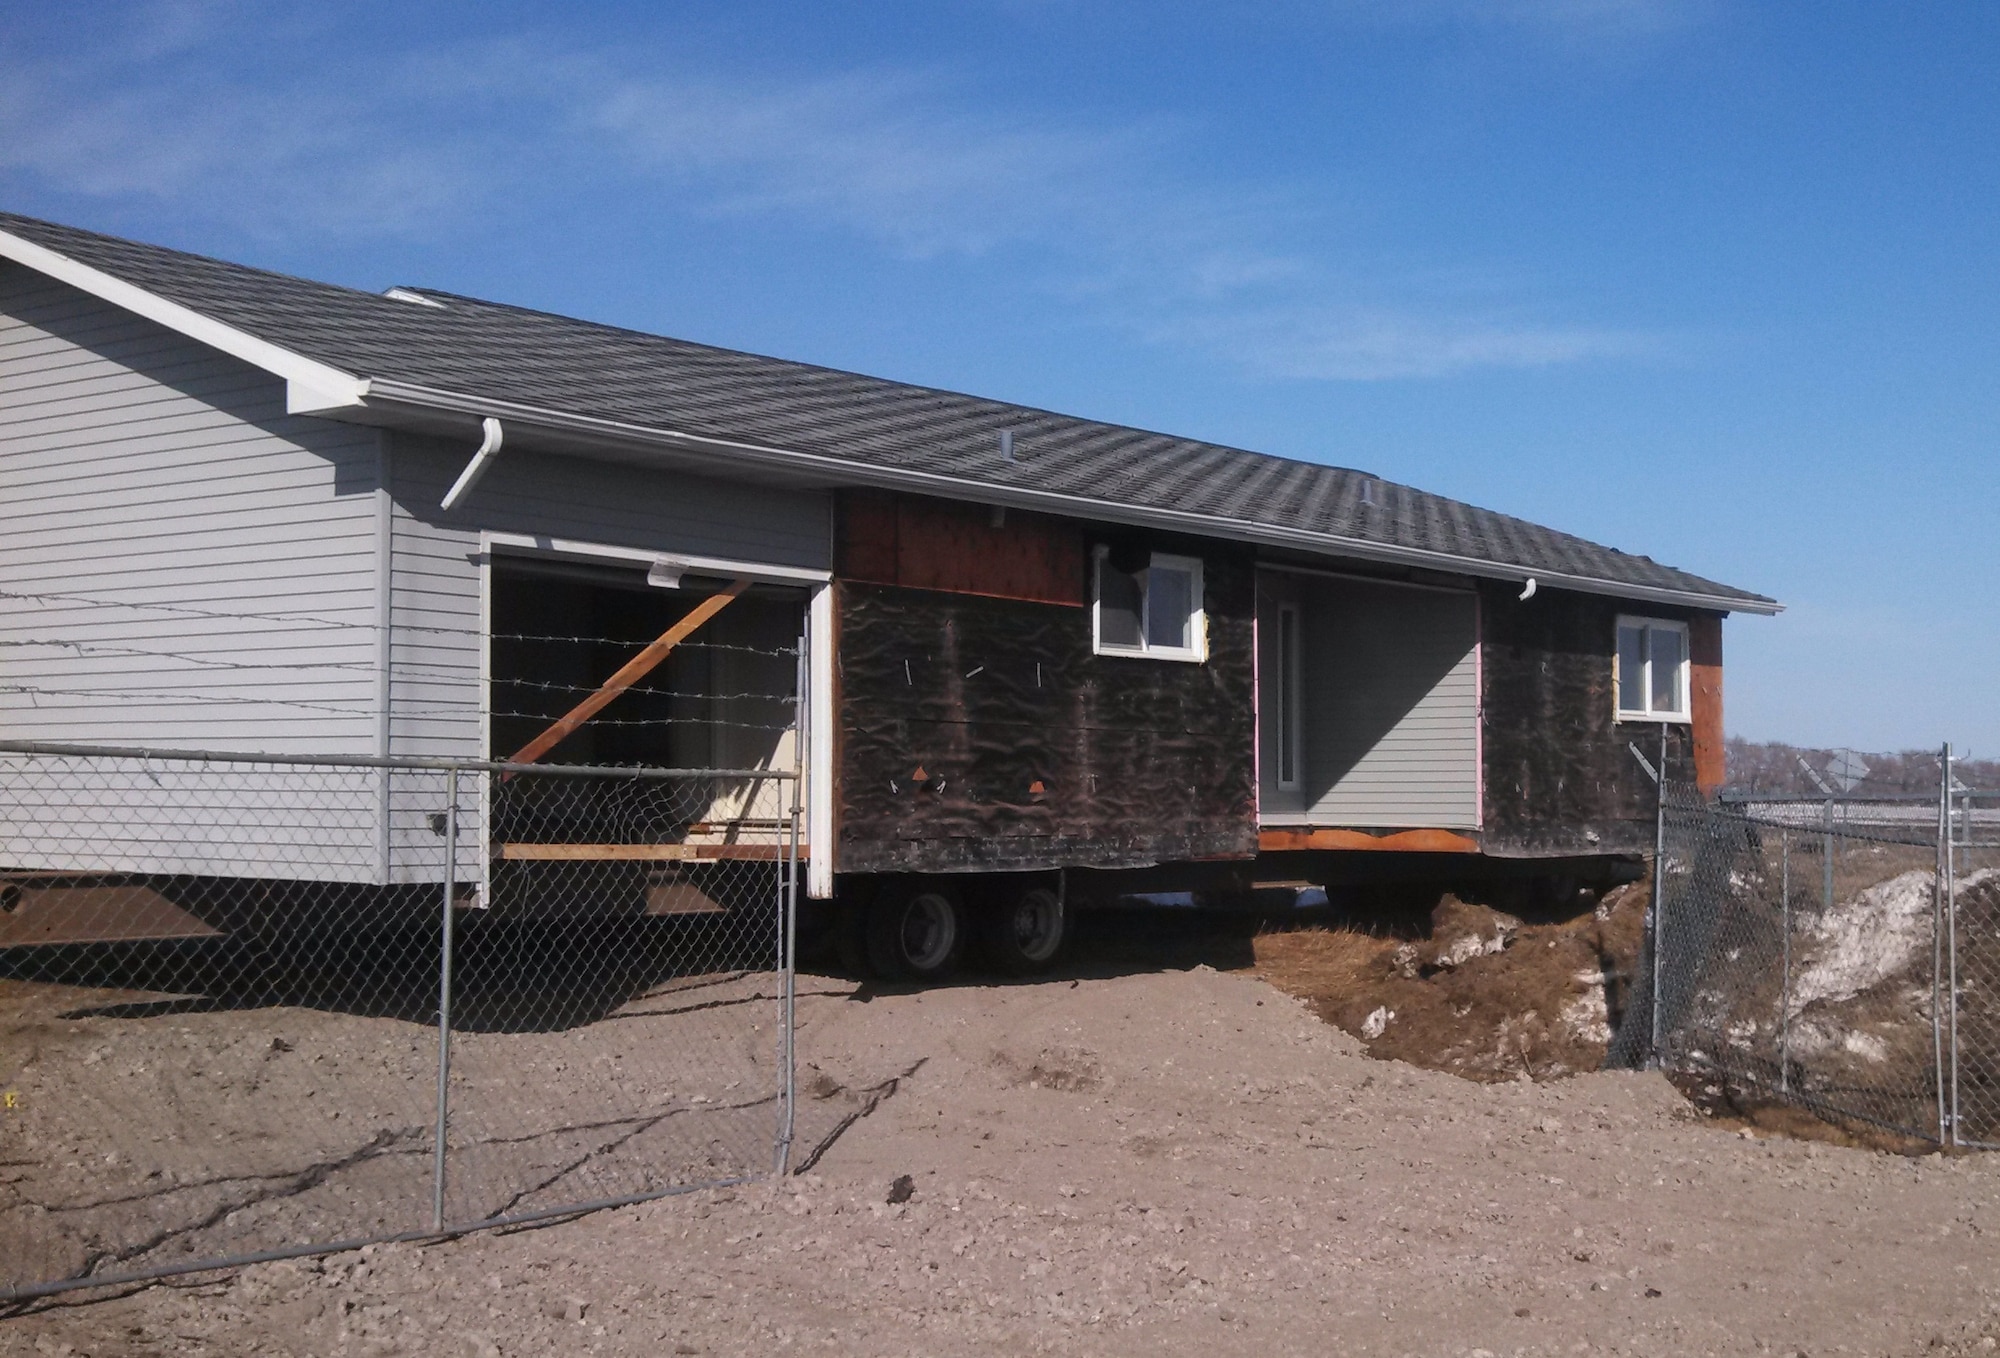 A former Air Force home is hauled away from Grand Forks Air Force Base, N.D., spring of 2014. The home was among the first of 31 units donated this year to the nearby Turtle Mountain Indian Reservation through Operation Walking Shield. The program works to address the chronic overcrowding and homelessness prevalent on American Indian reservations. (Air Force Photo/Cassandra Spradlin)